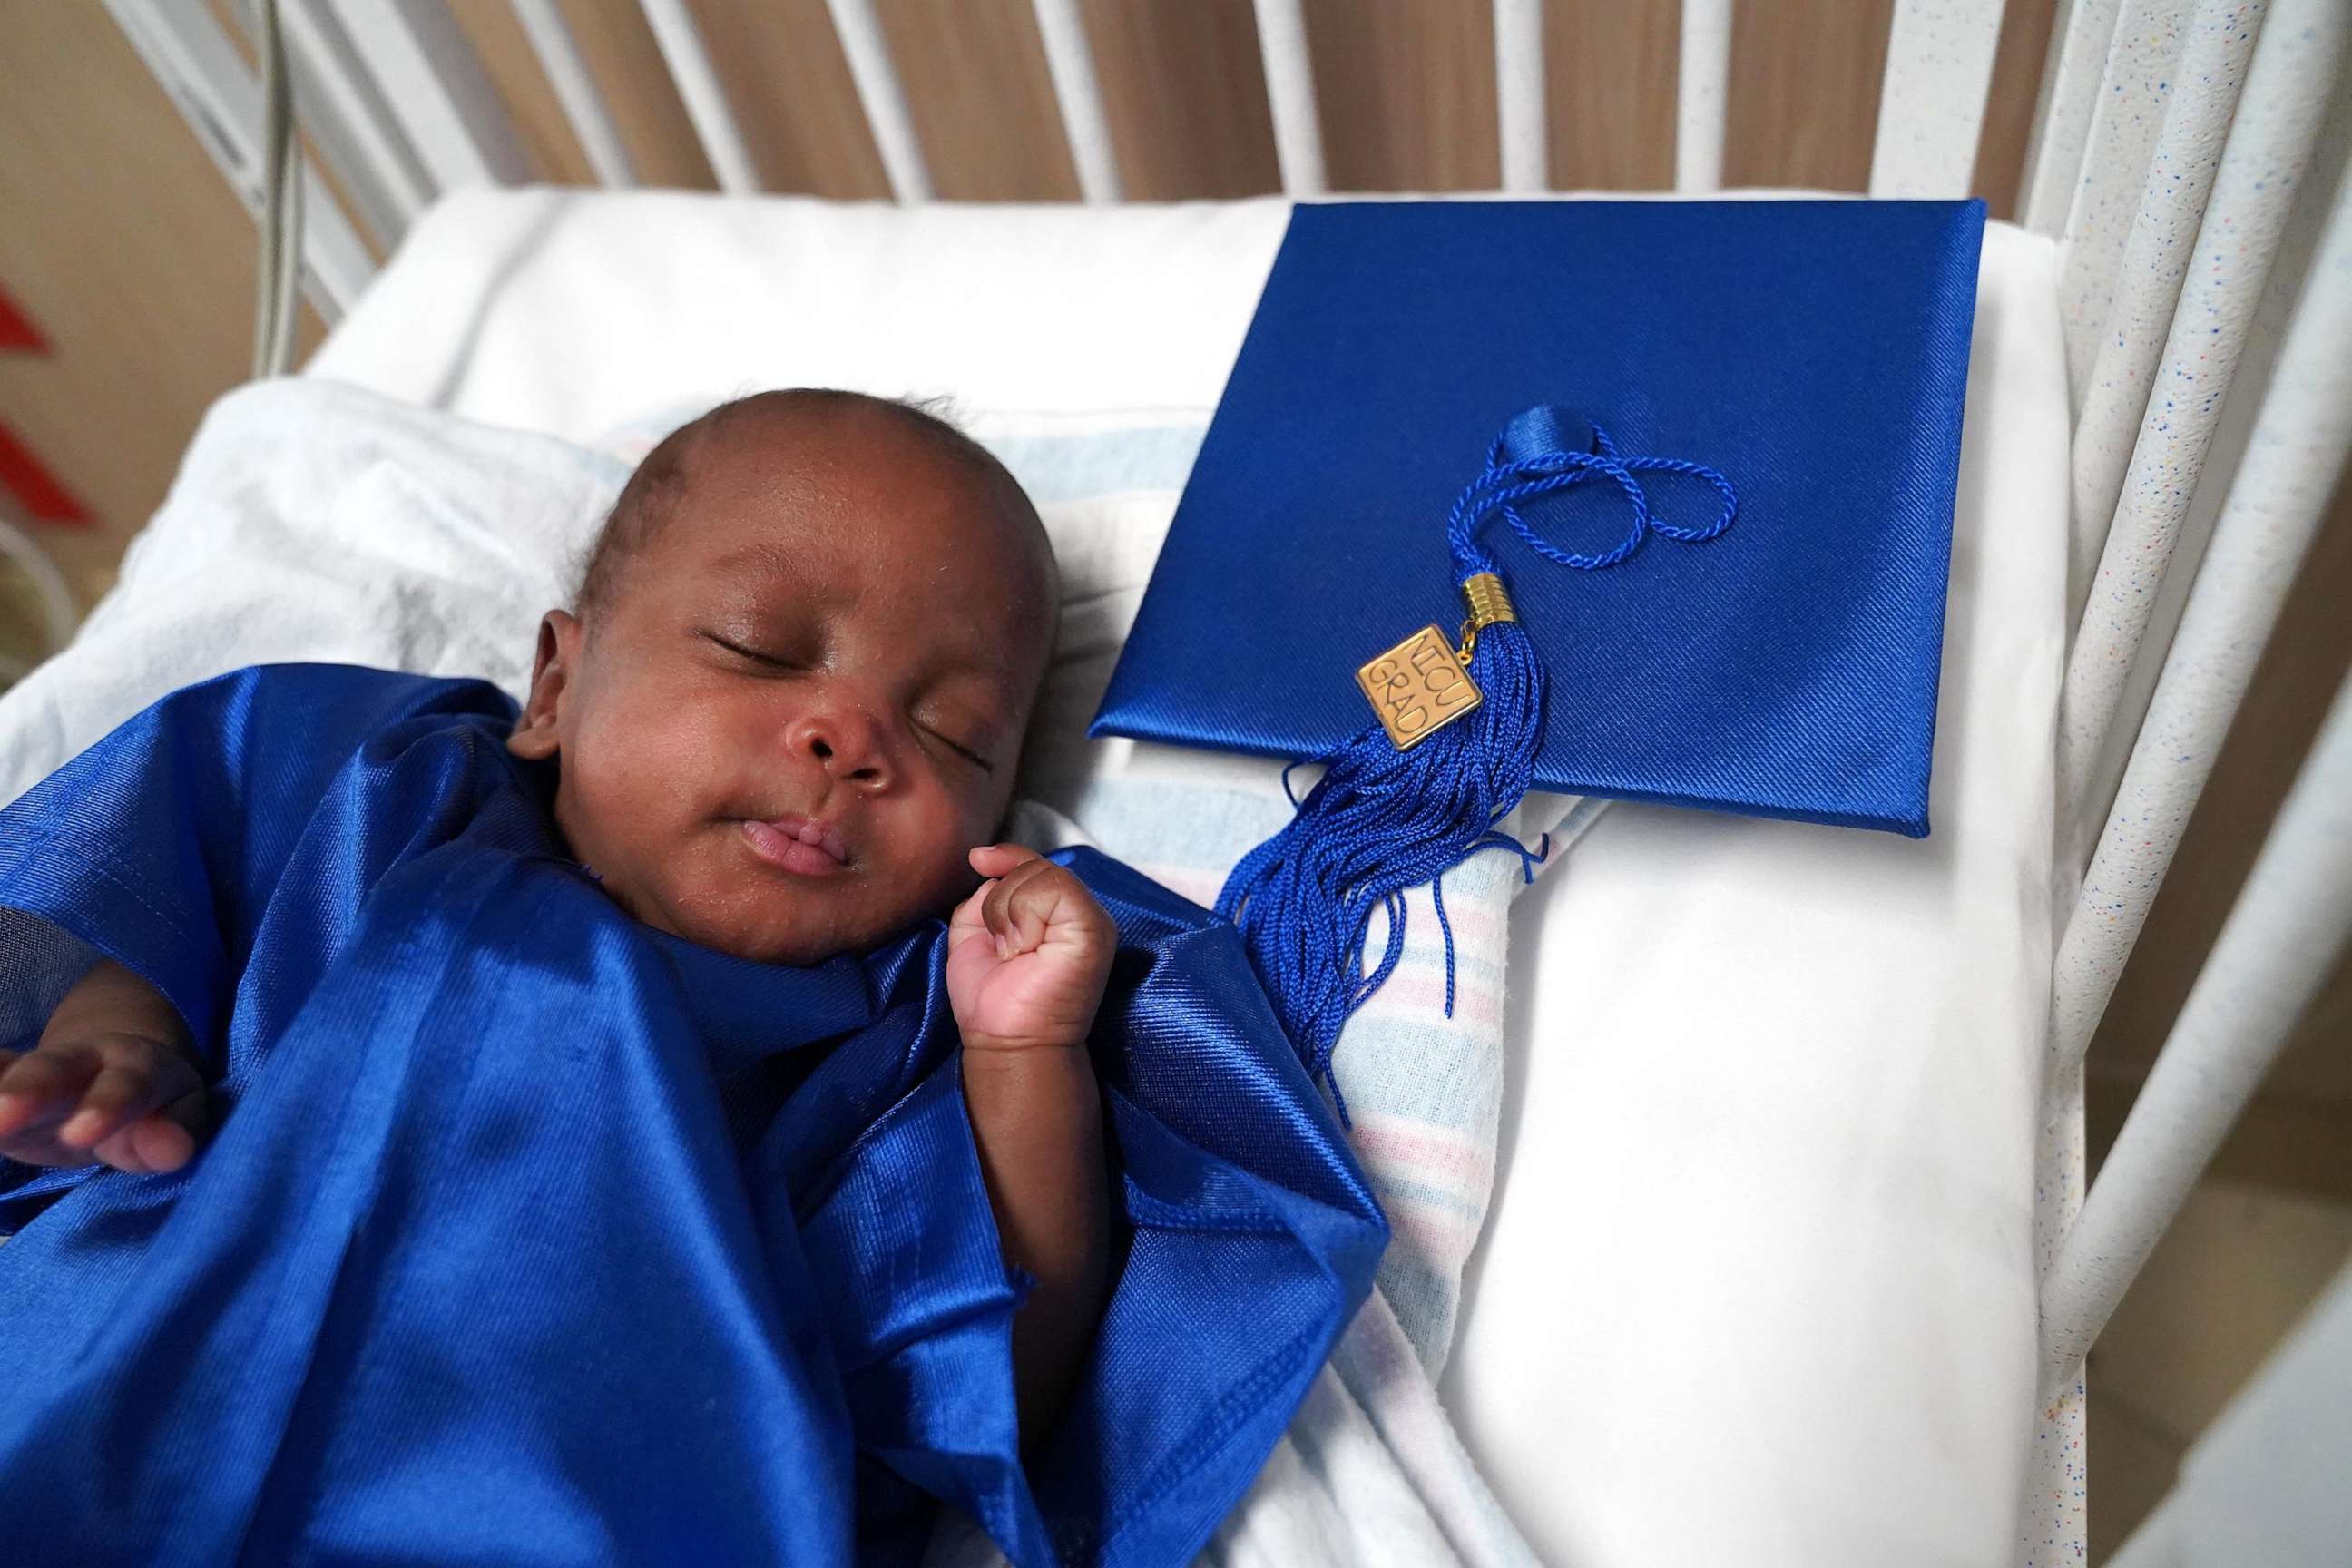 PHOTO: Baby Alanie, who was born at 23 weeks, graduated from the neonatal intensive care unit at Broward Health Medical Center in Fort Lauderdale, Florida, in May and is now home with his family in the U.S. Virgin Islands.